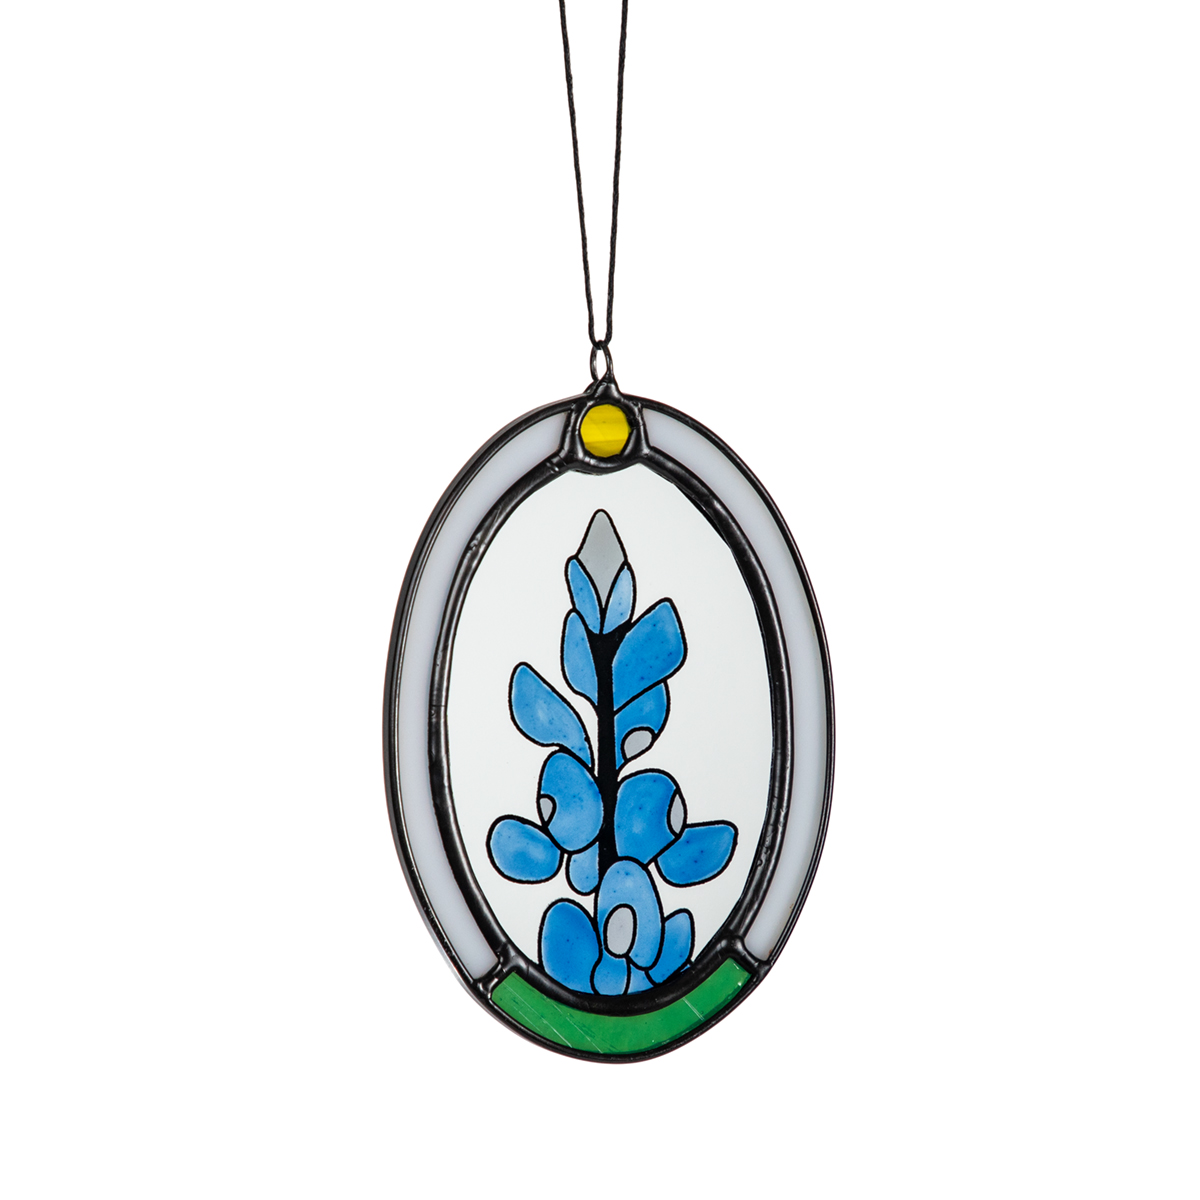 Bluebonnet Stained Glass Art, Small